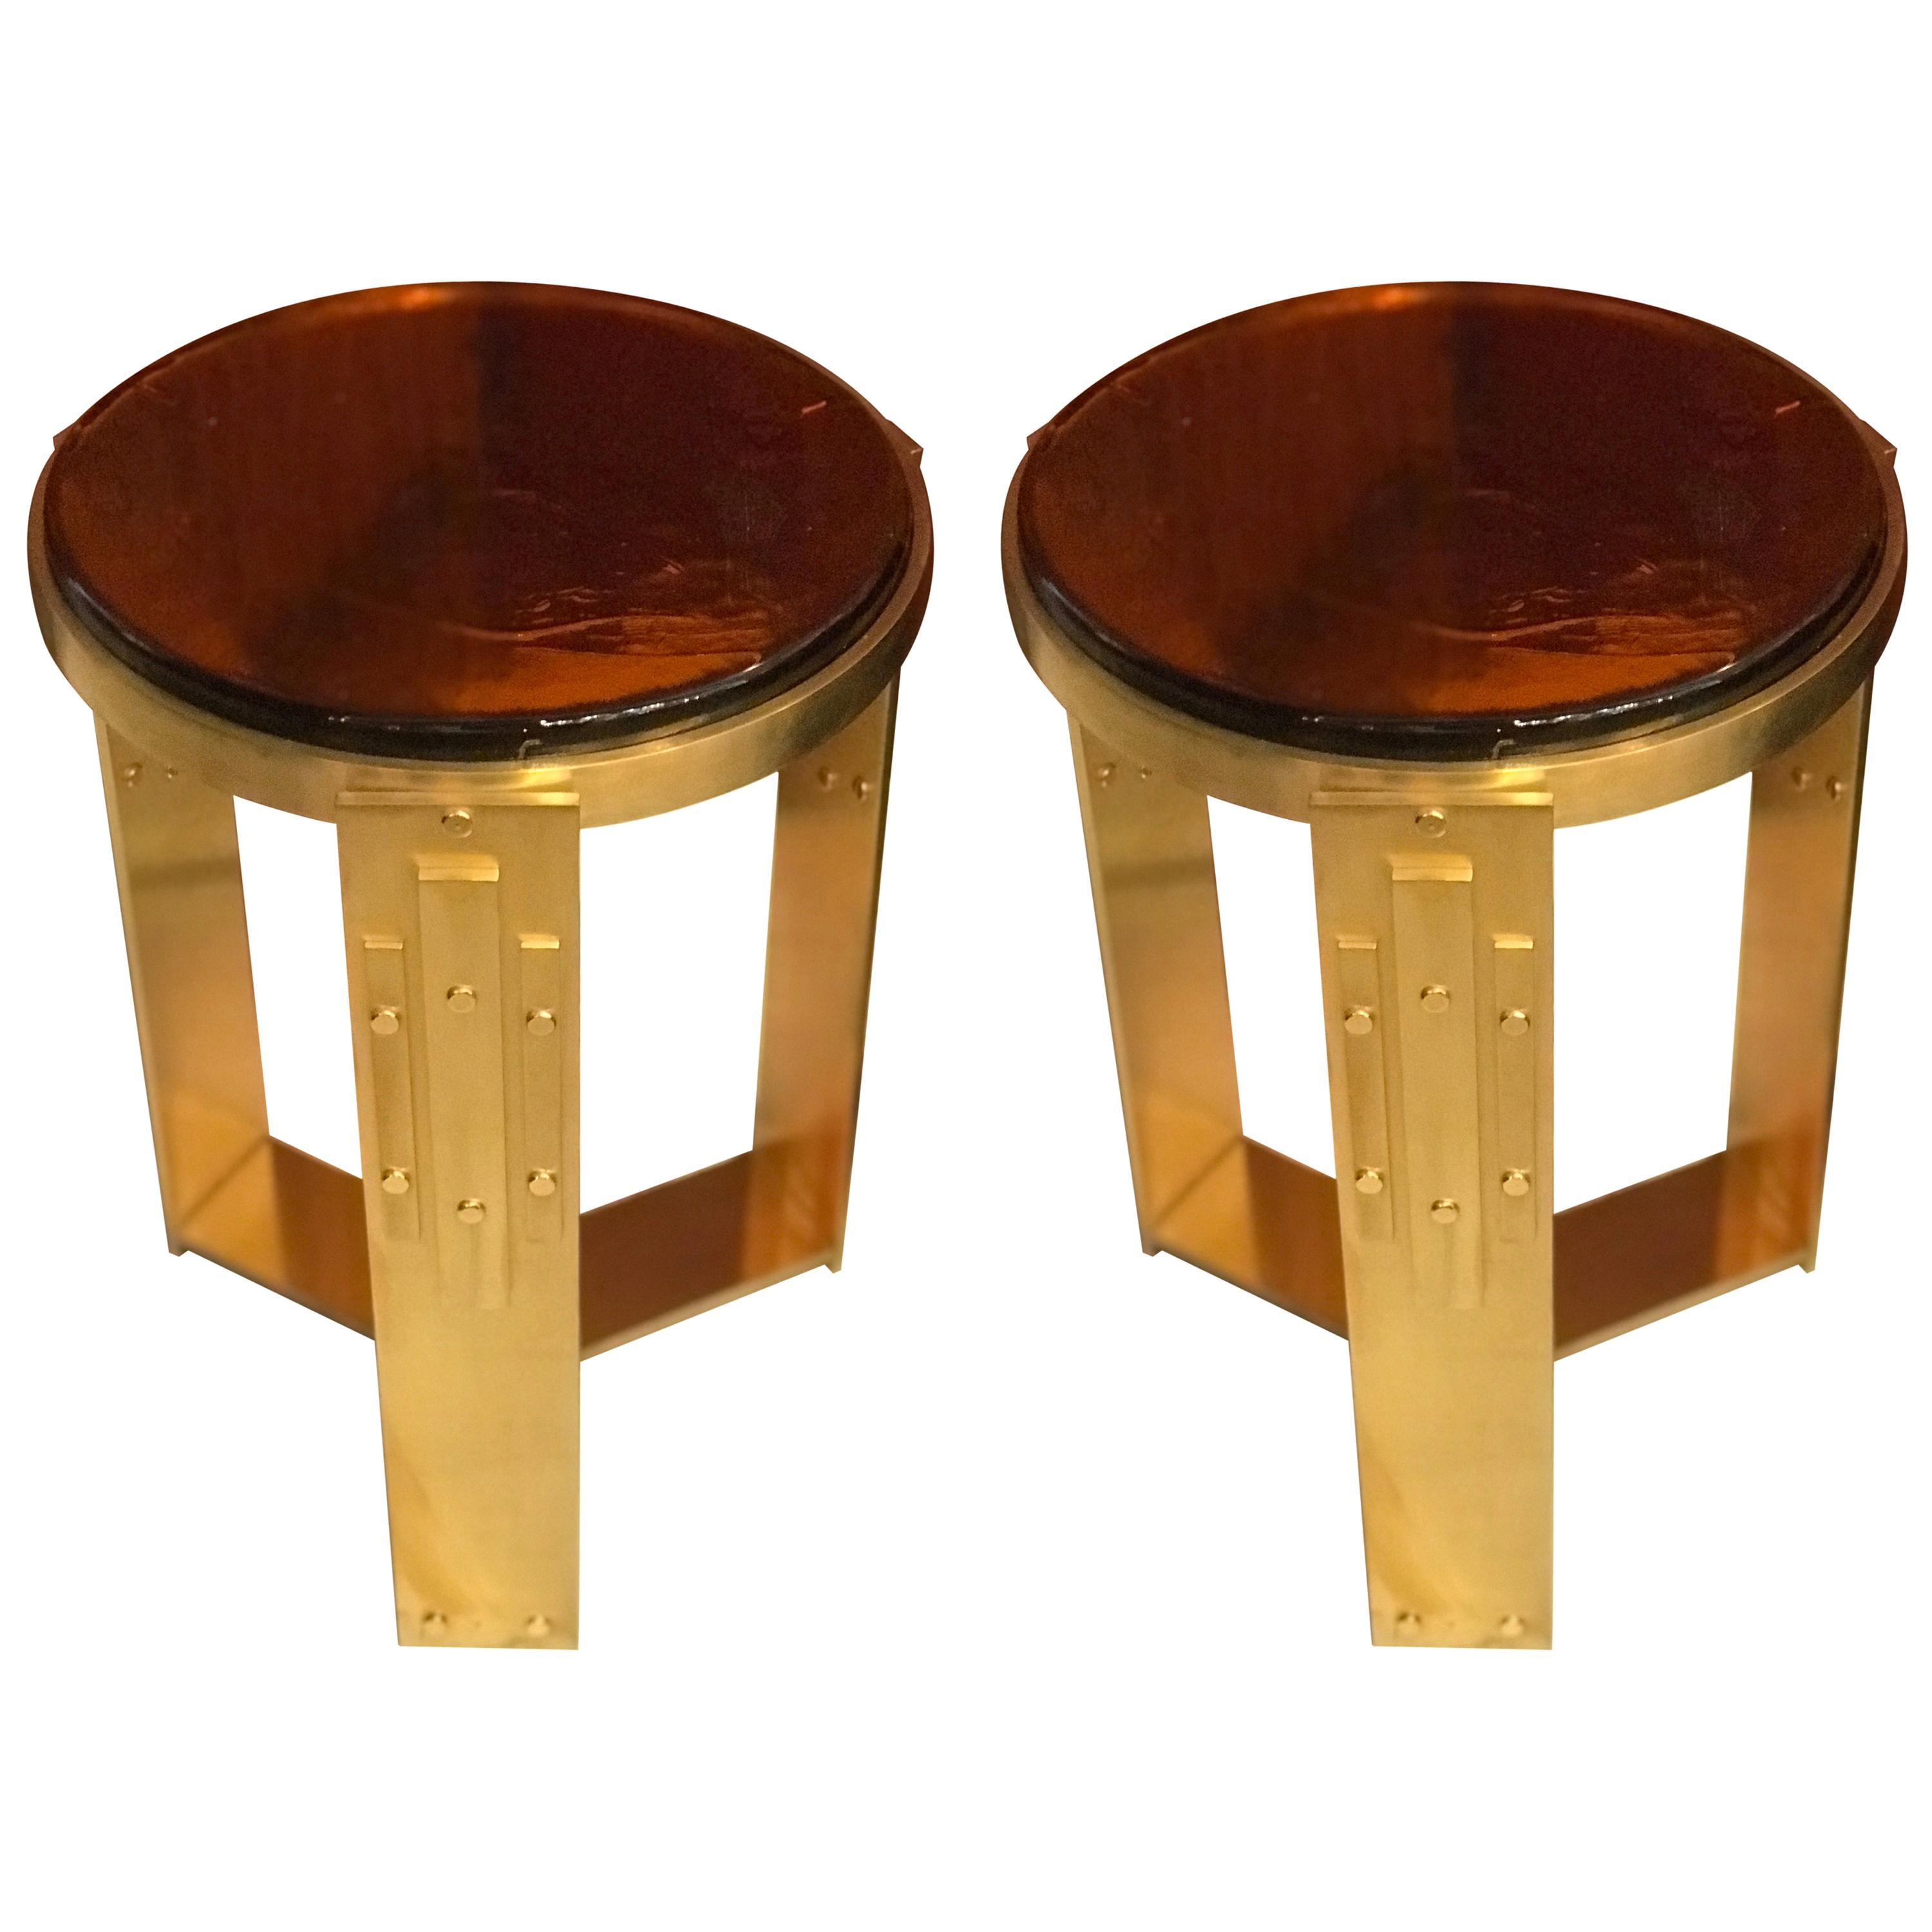 Pair of Midcentury Italian Brass and Glass Accent Tables